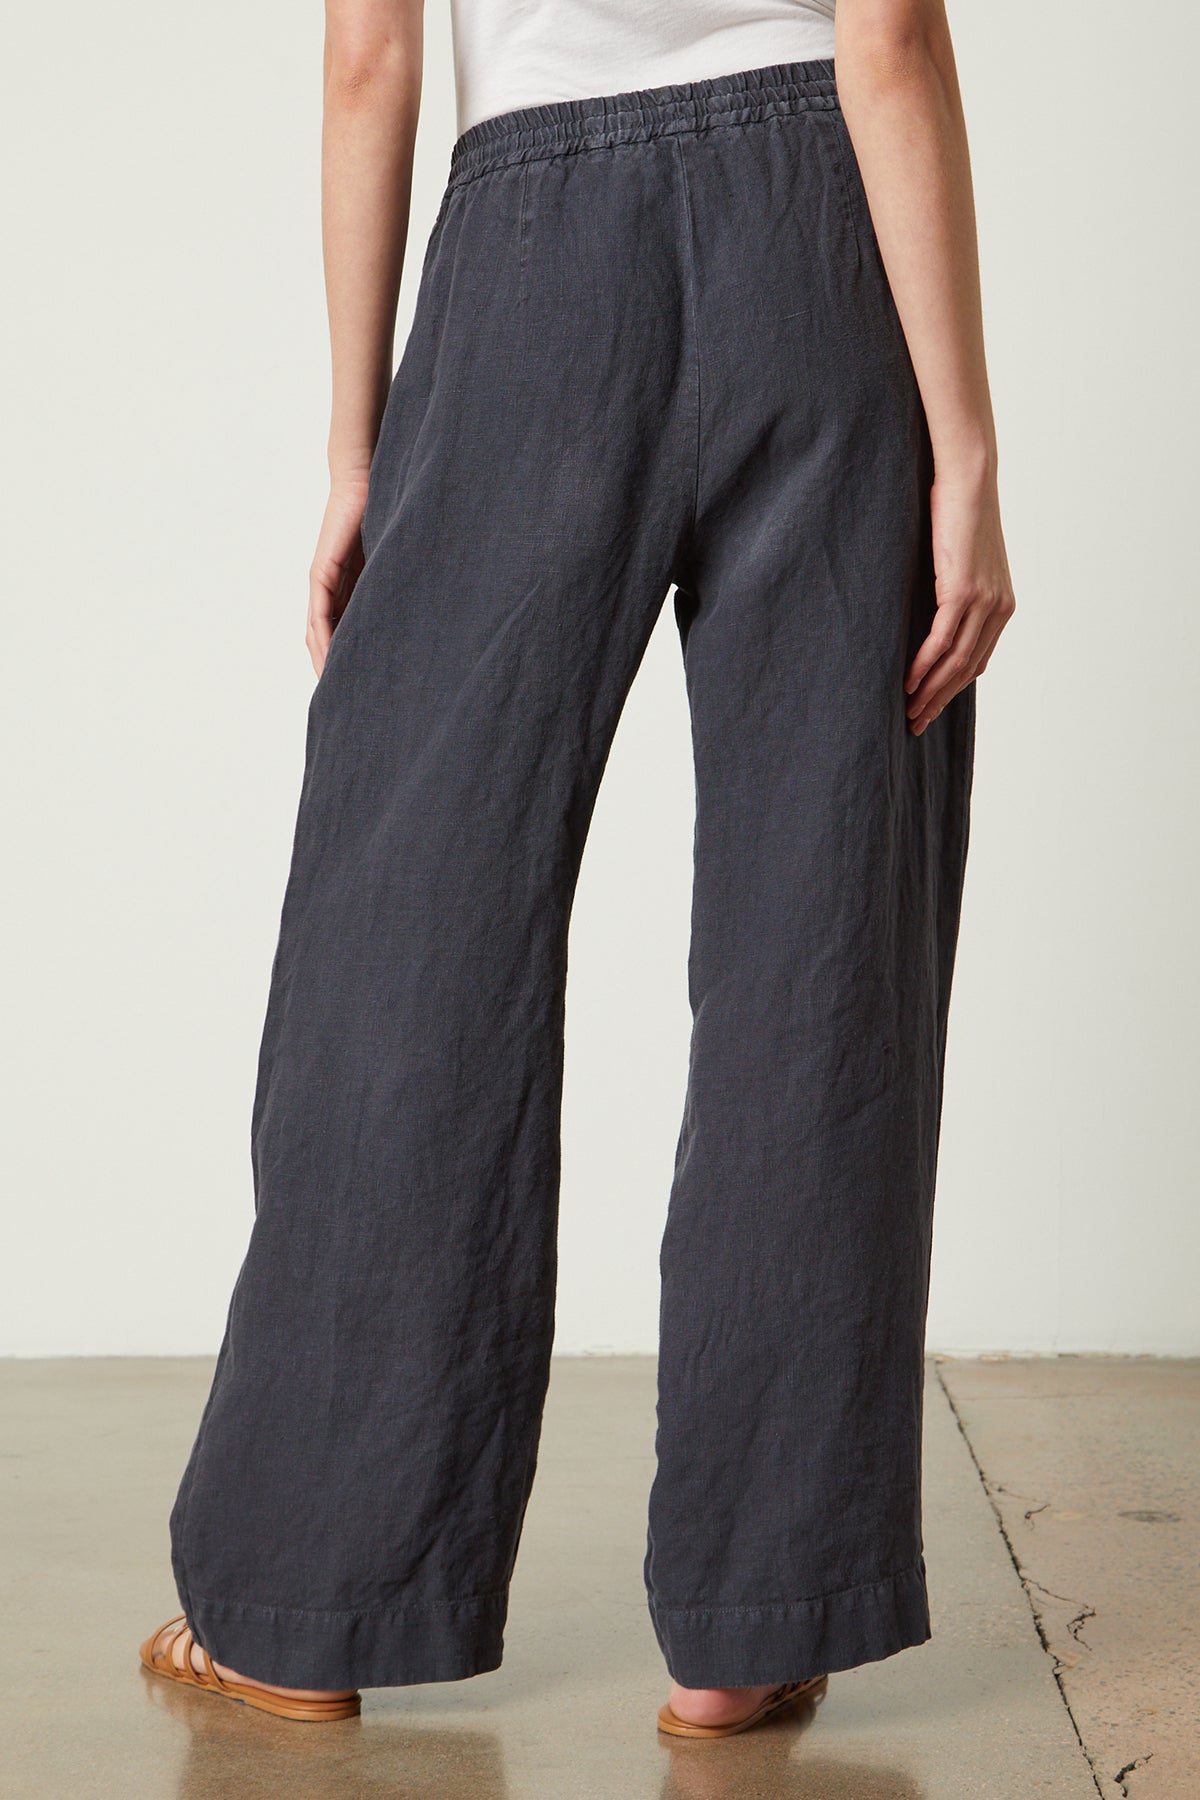 The back view of a woman wearing a pair of Velvet by Graham & Spencer GWYNETH HEAVY LINEN PANT wide leg pants.-35954253562049